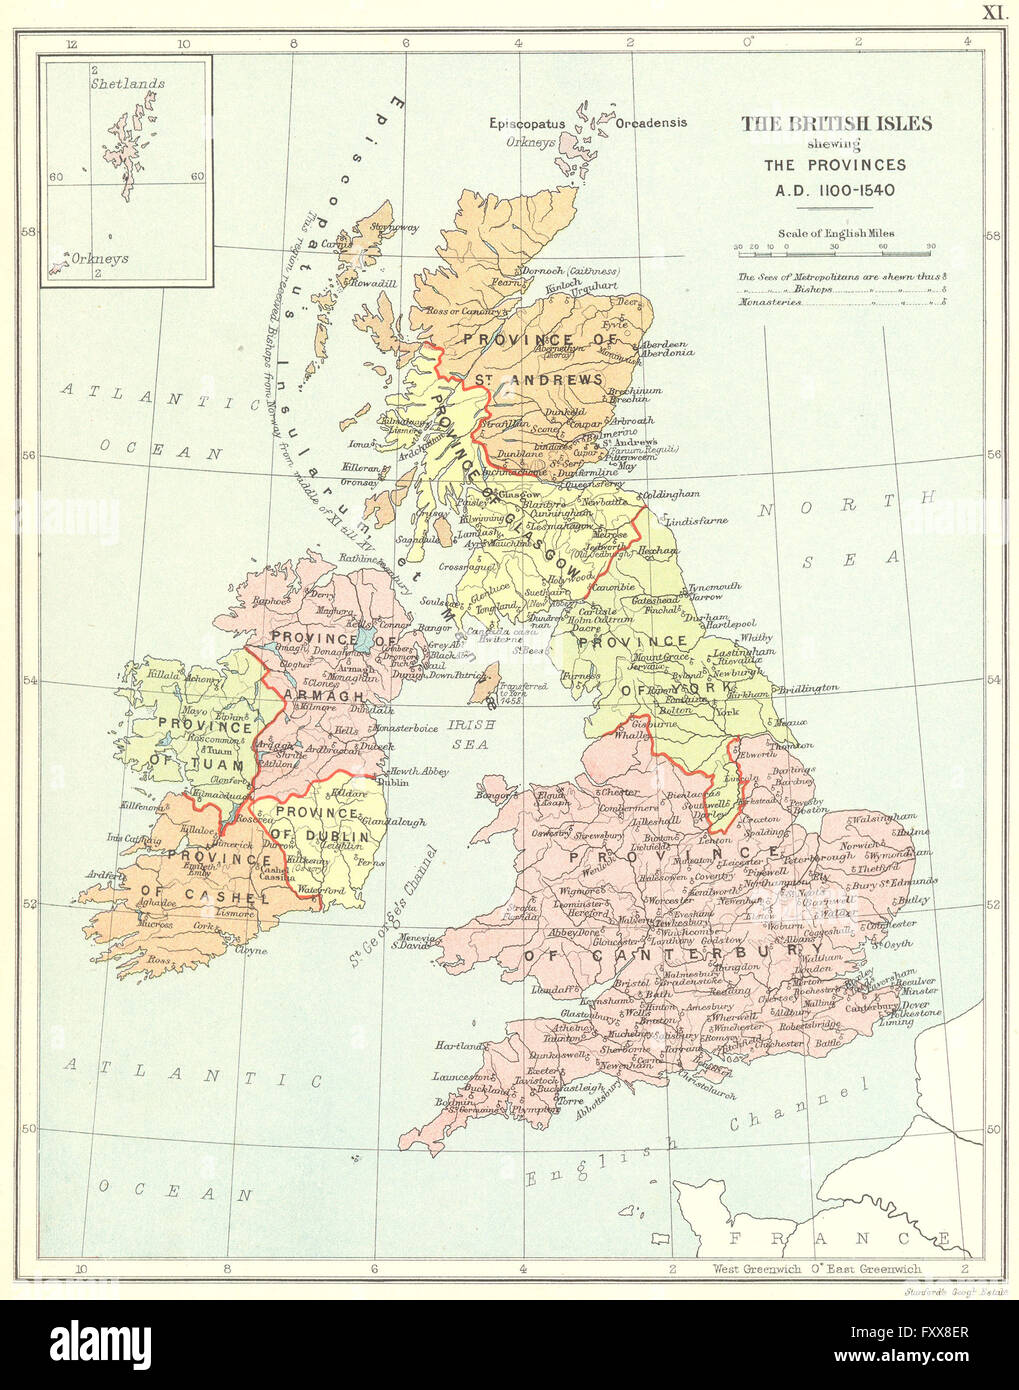 BRITISH ISLES ECCLESIASTICAL 1100-1540AD: Showing provinces. Church, 1897 map Stock Photo